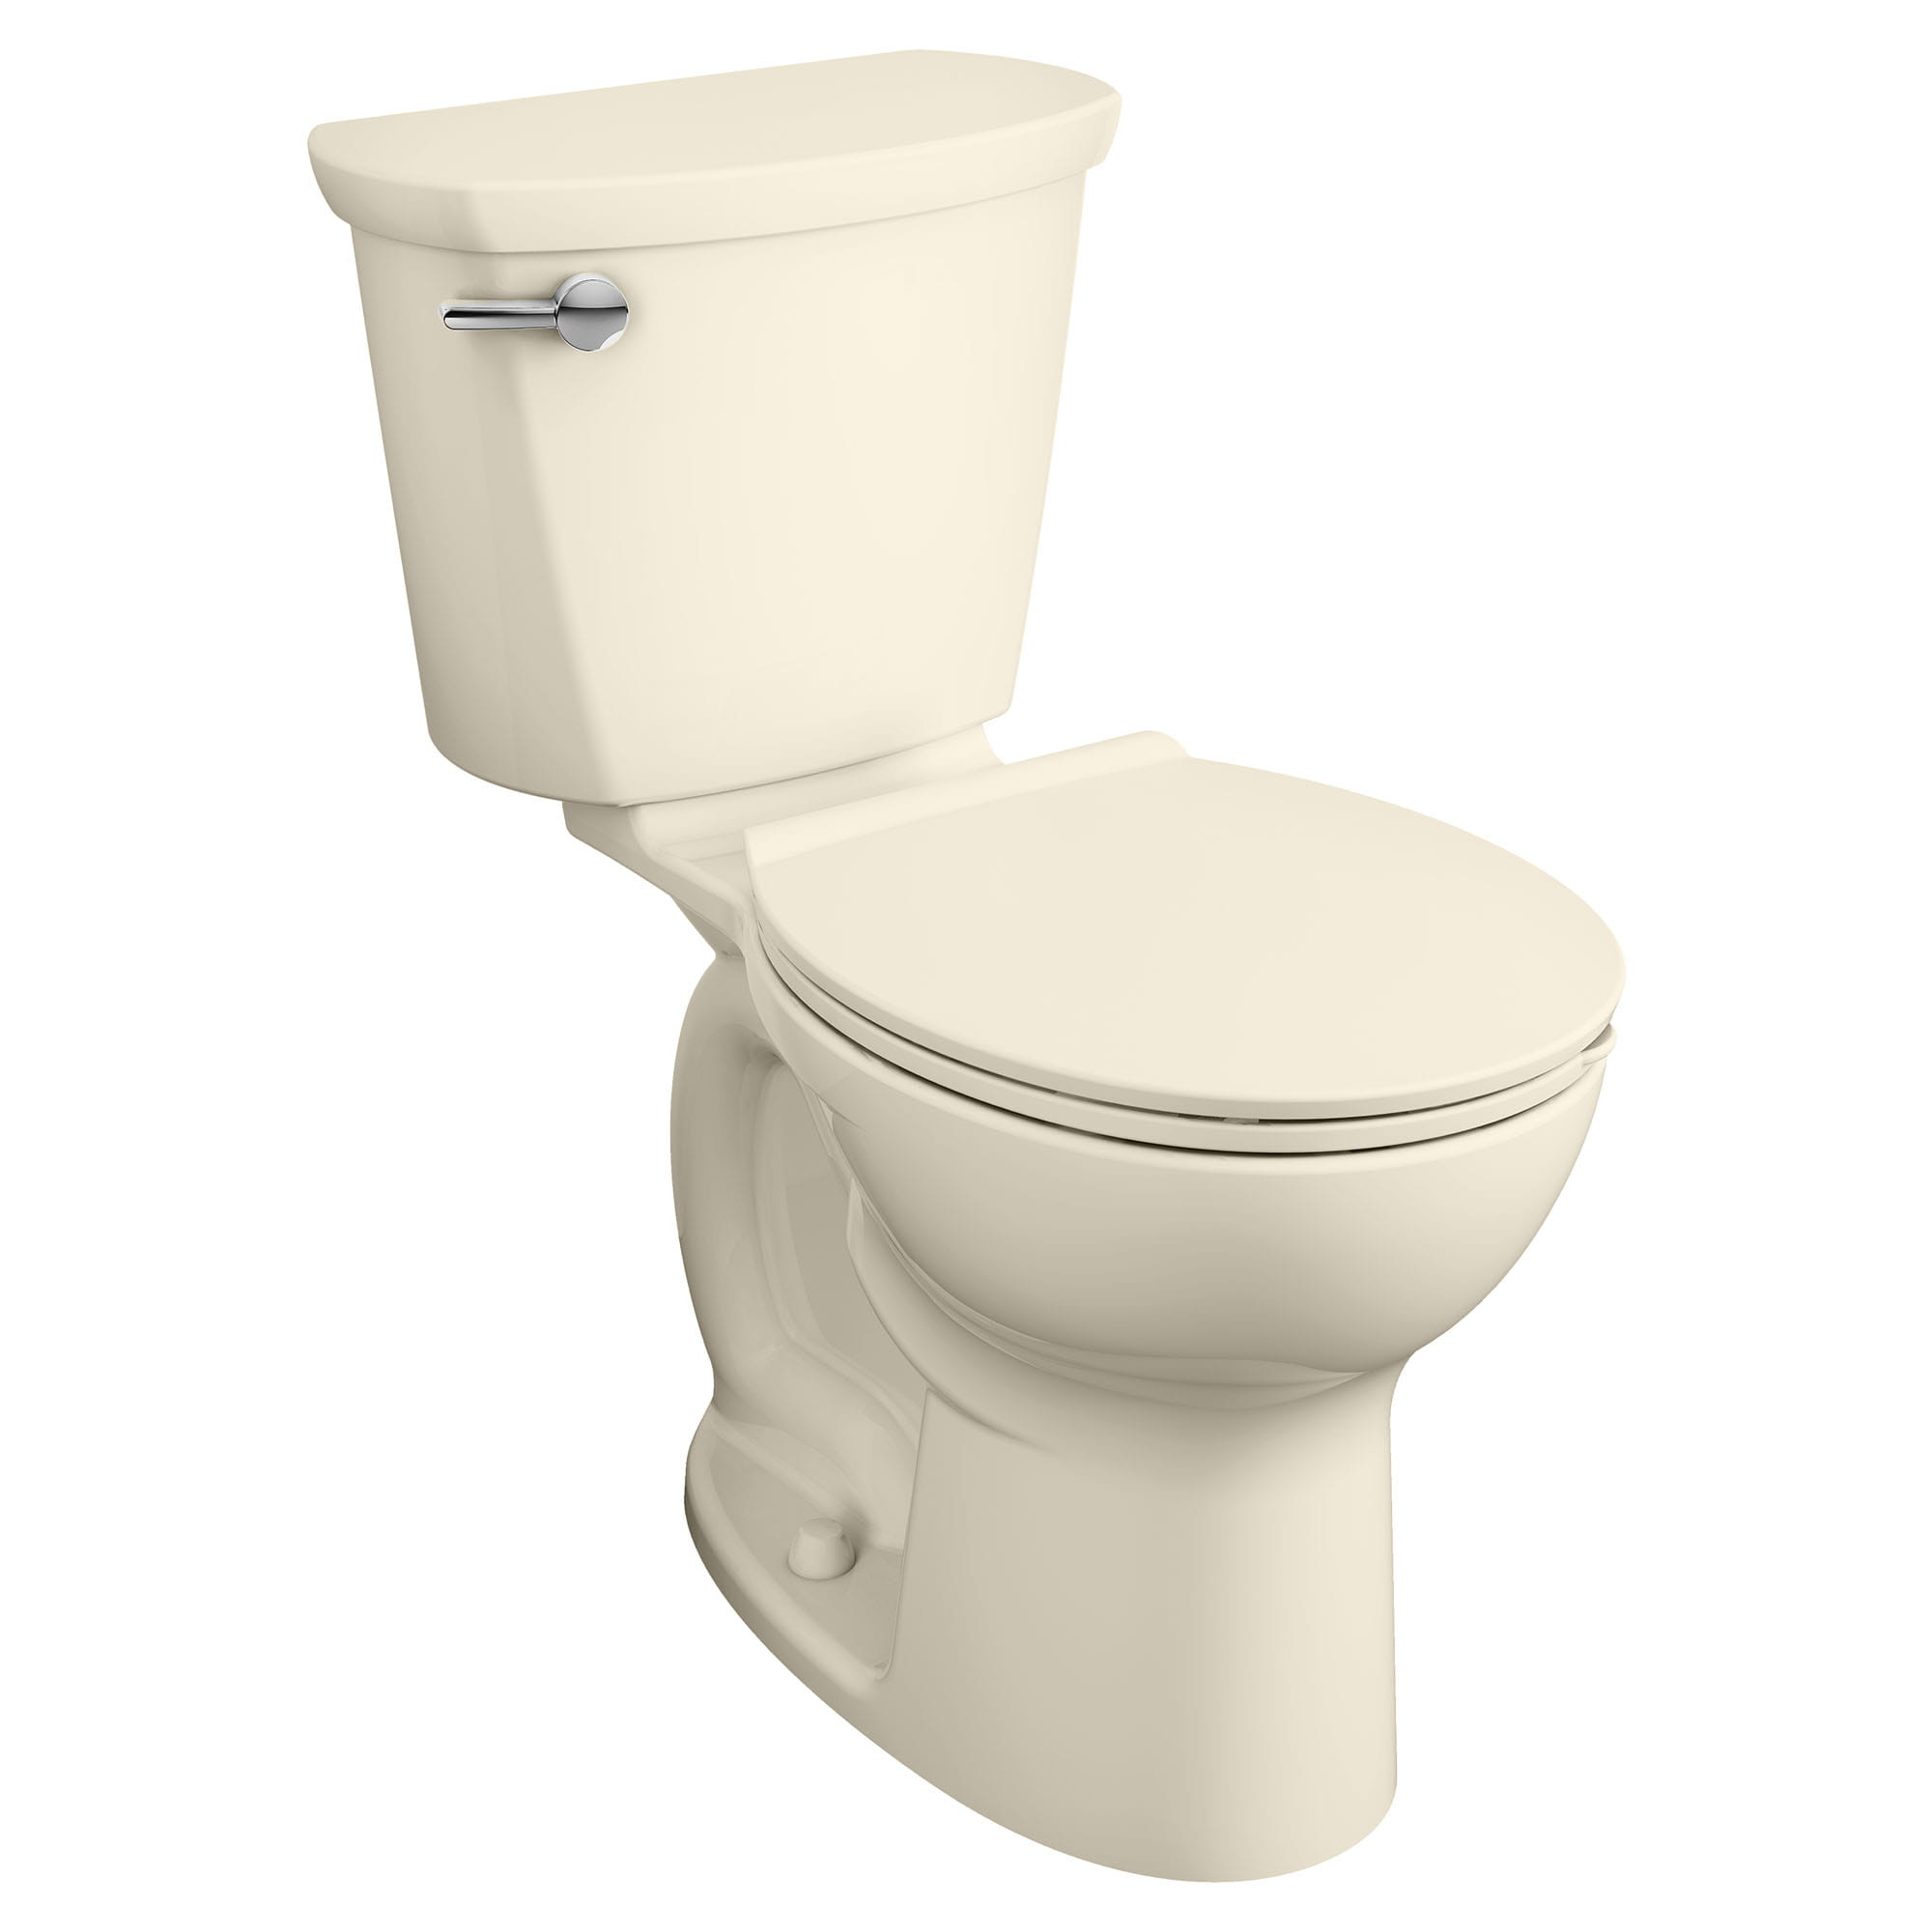 Cadet PRO Two Piece 128 gpf 48 Lpf Chair Height Round Front Toilet Less Seat BONE